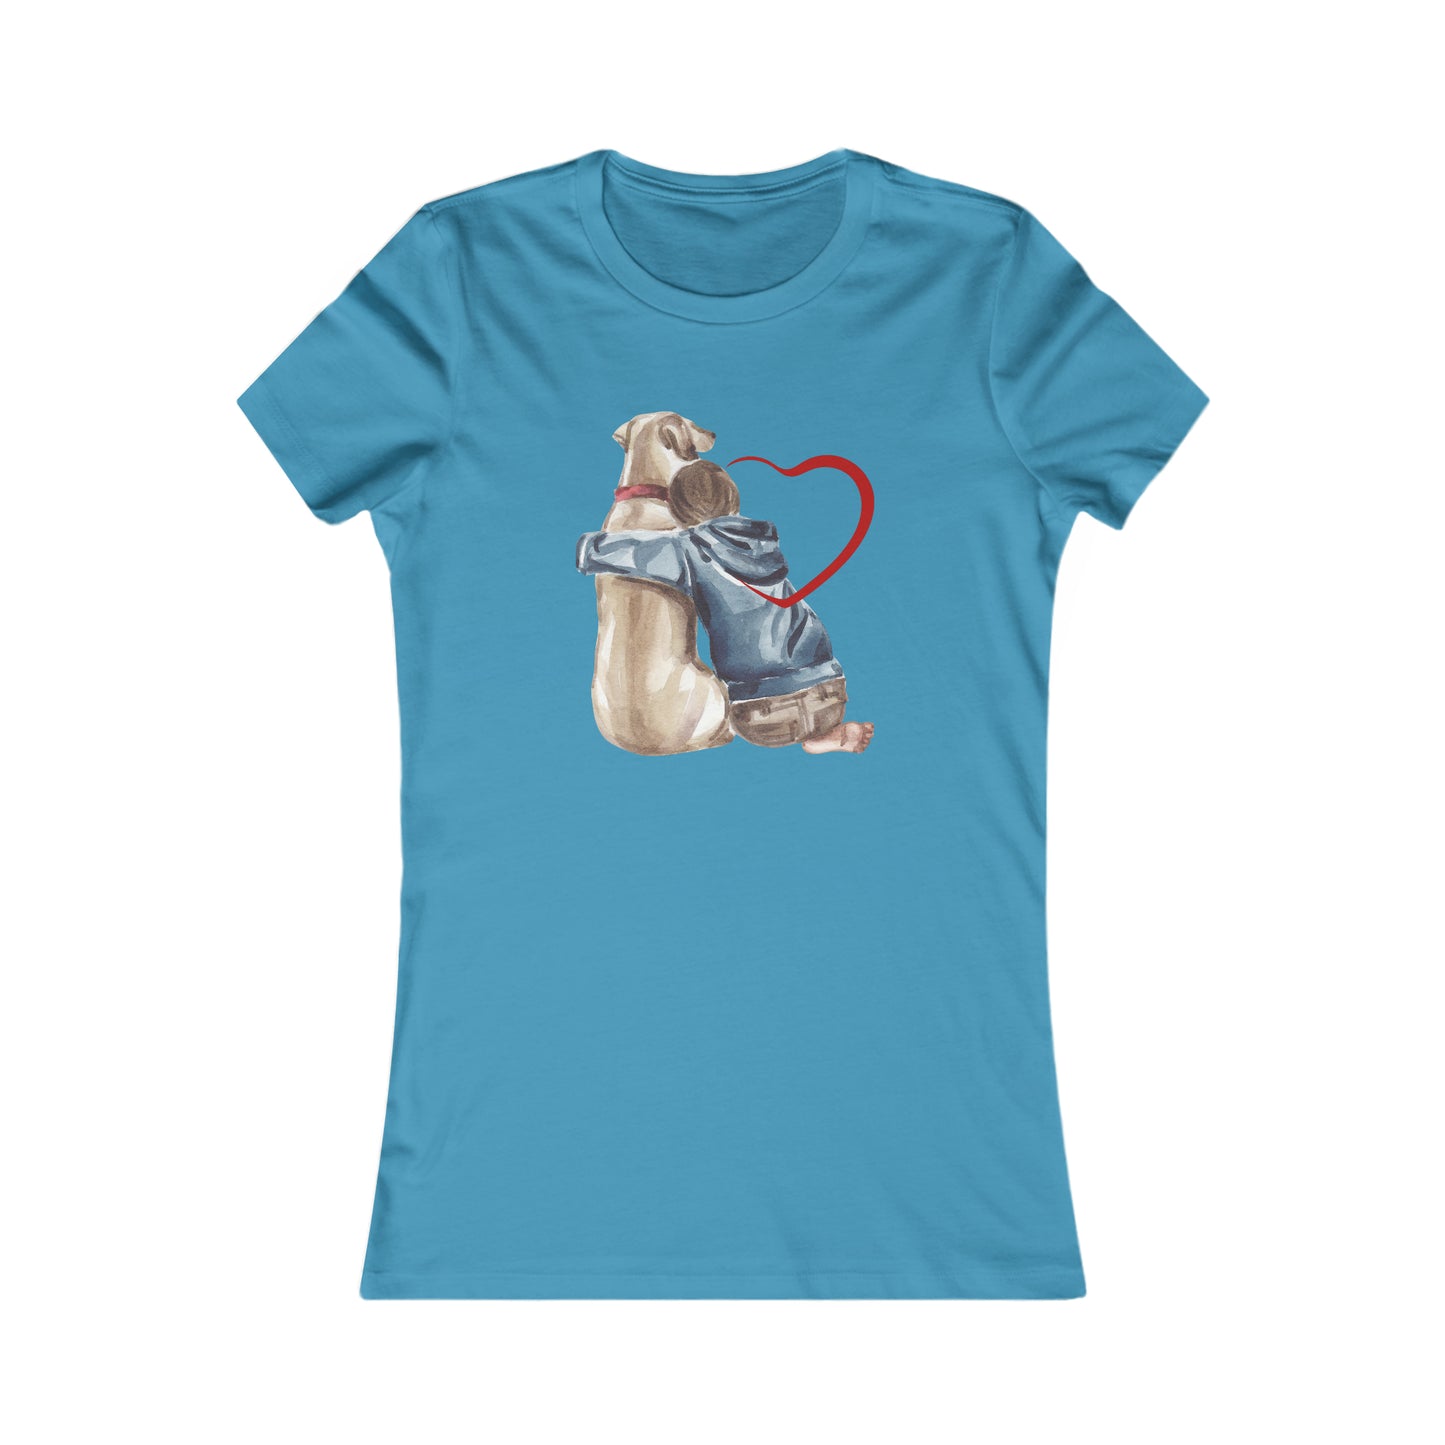 Calling all dog lovers who knows the depth of their love. This Women's Favorite Tee designed for that dog lover in several colors for you to choose from. Slim fit so please check the size table.